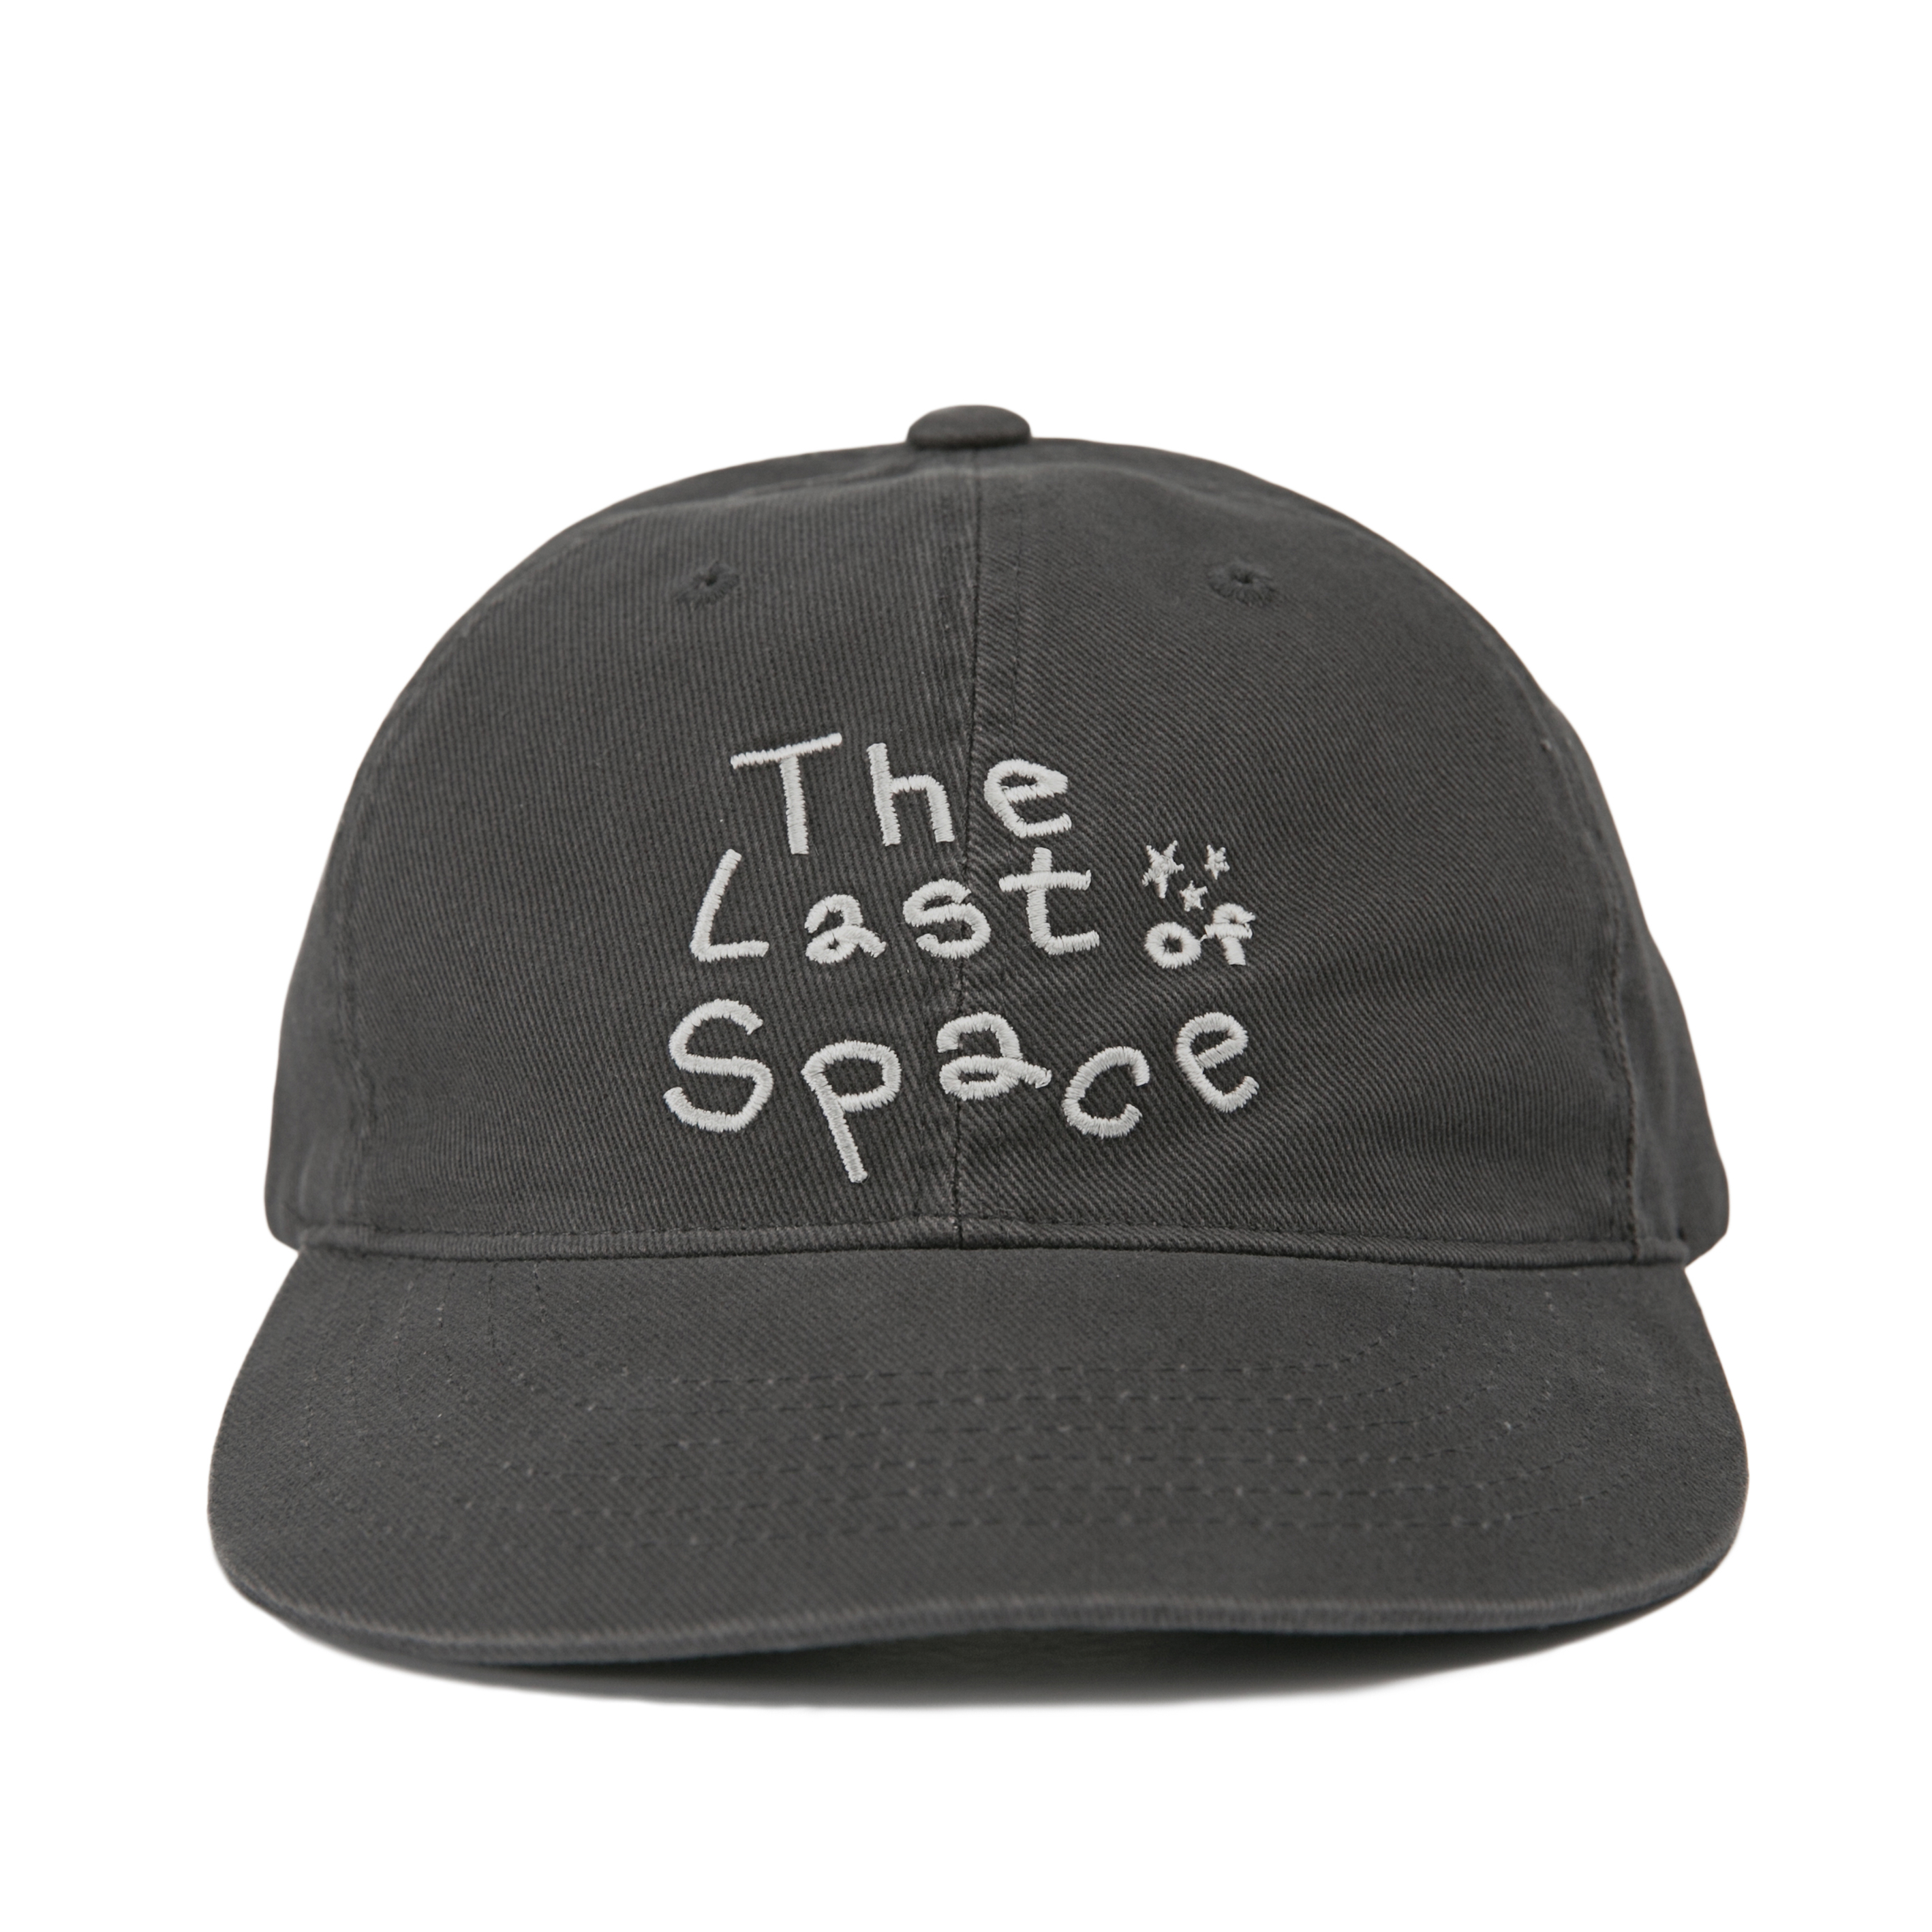 Last of Space cap (Charcoal)